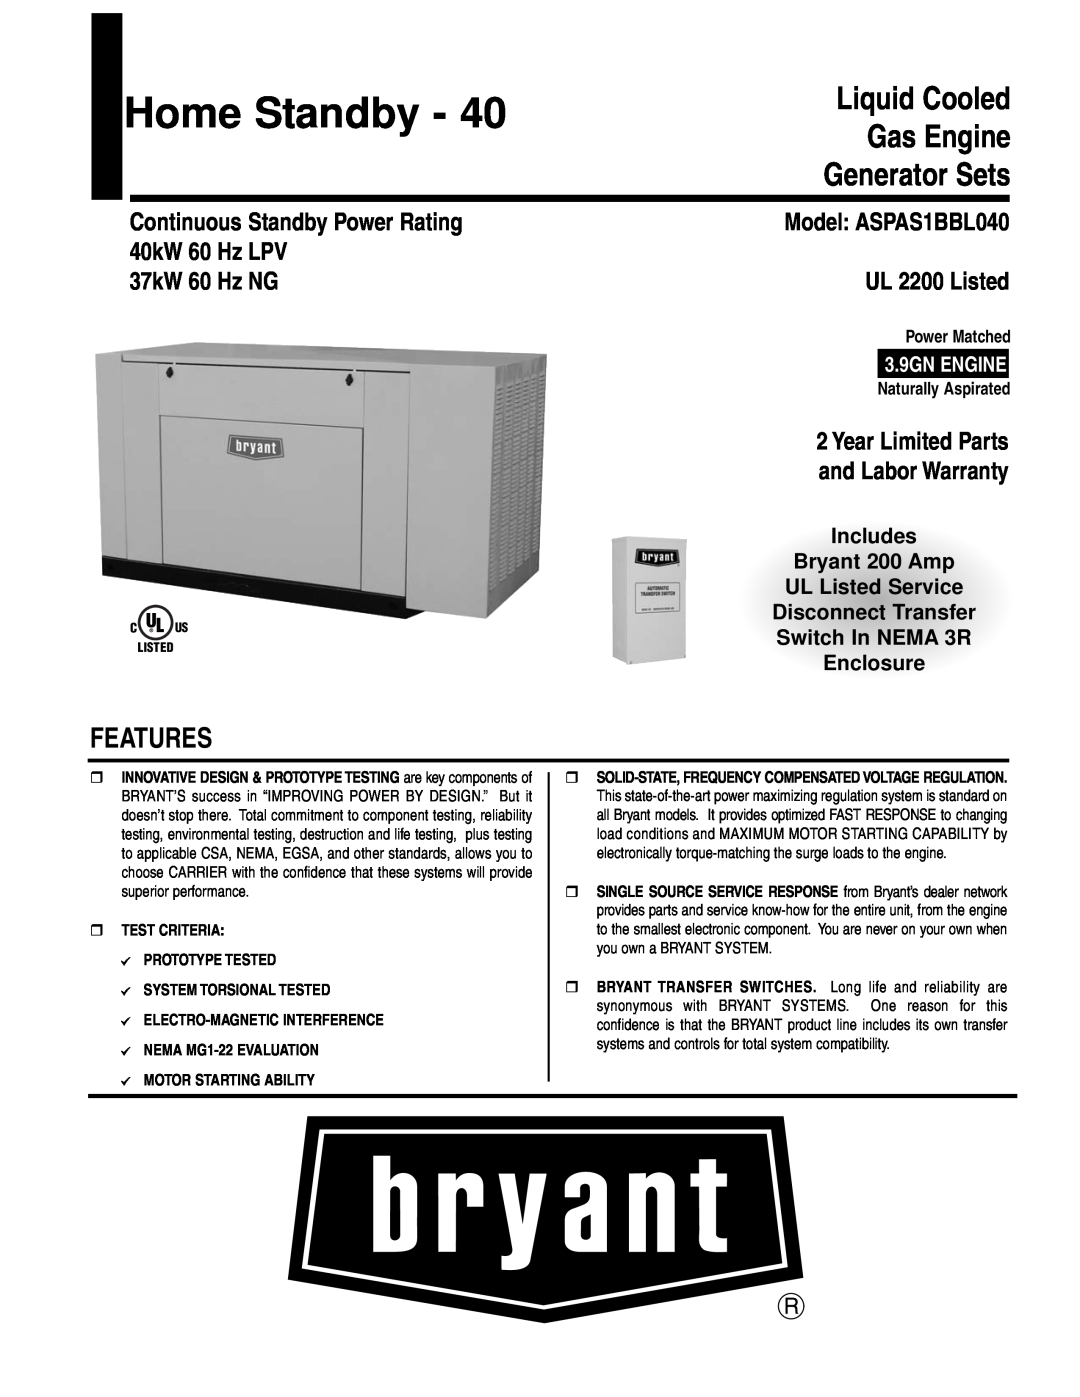 Bryant ASPAS1BBL040 warranty Liquid Cooled Gas Engine Generator Sets, Features, Continuous Standby Power Rating 